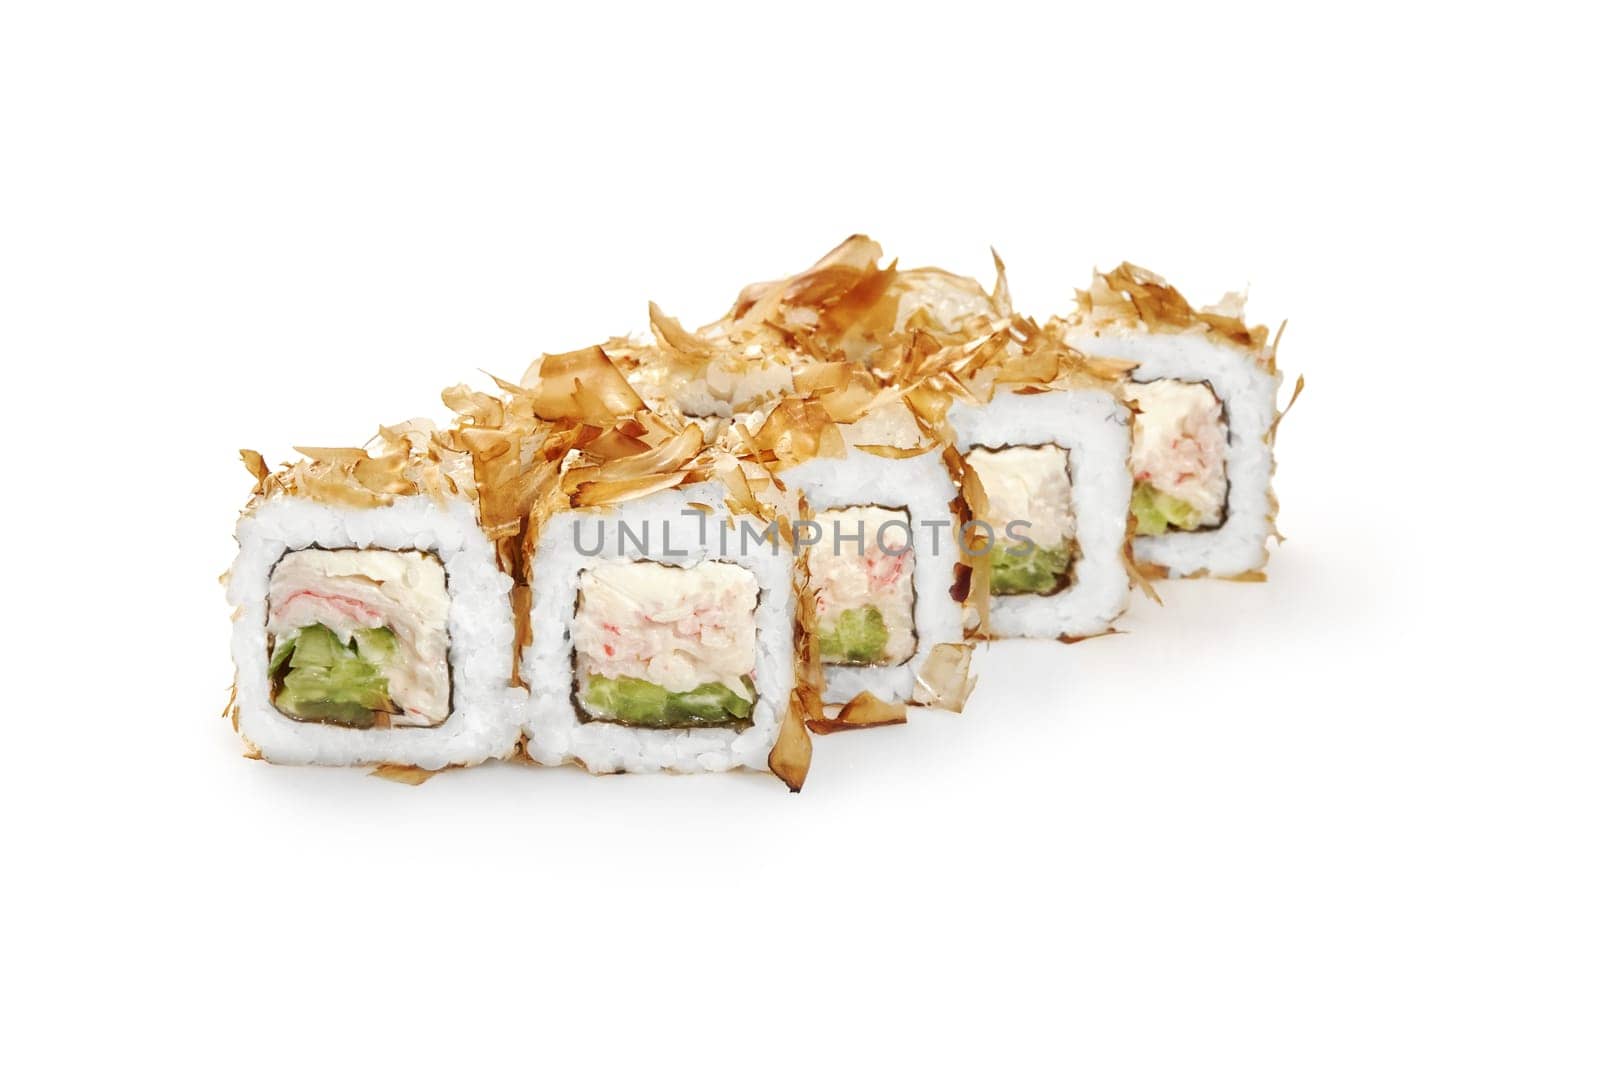 Bonito flakes sushi rolls with surimi, cream cheese and cucumber by nazarovsergey